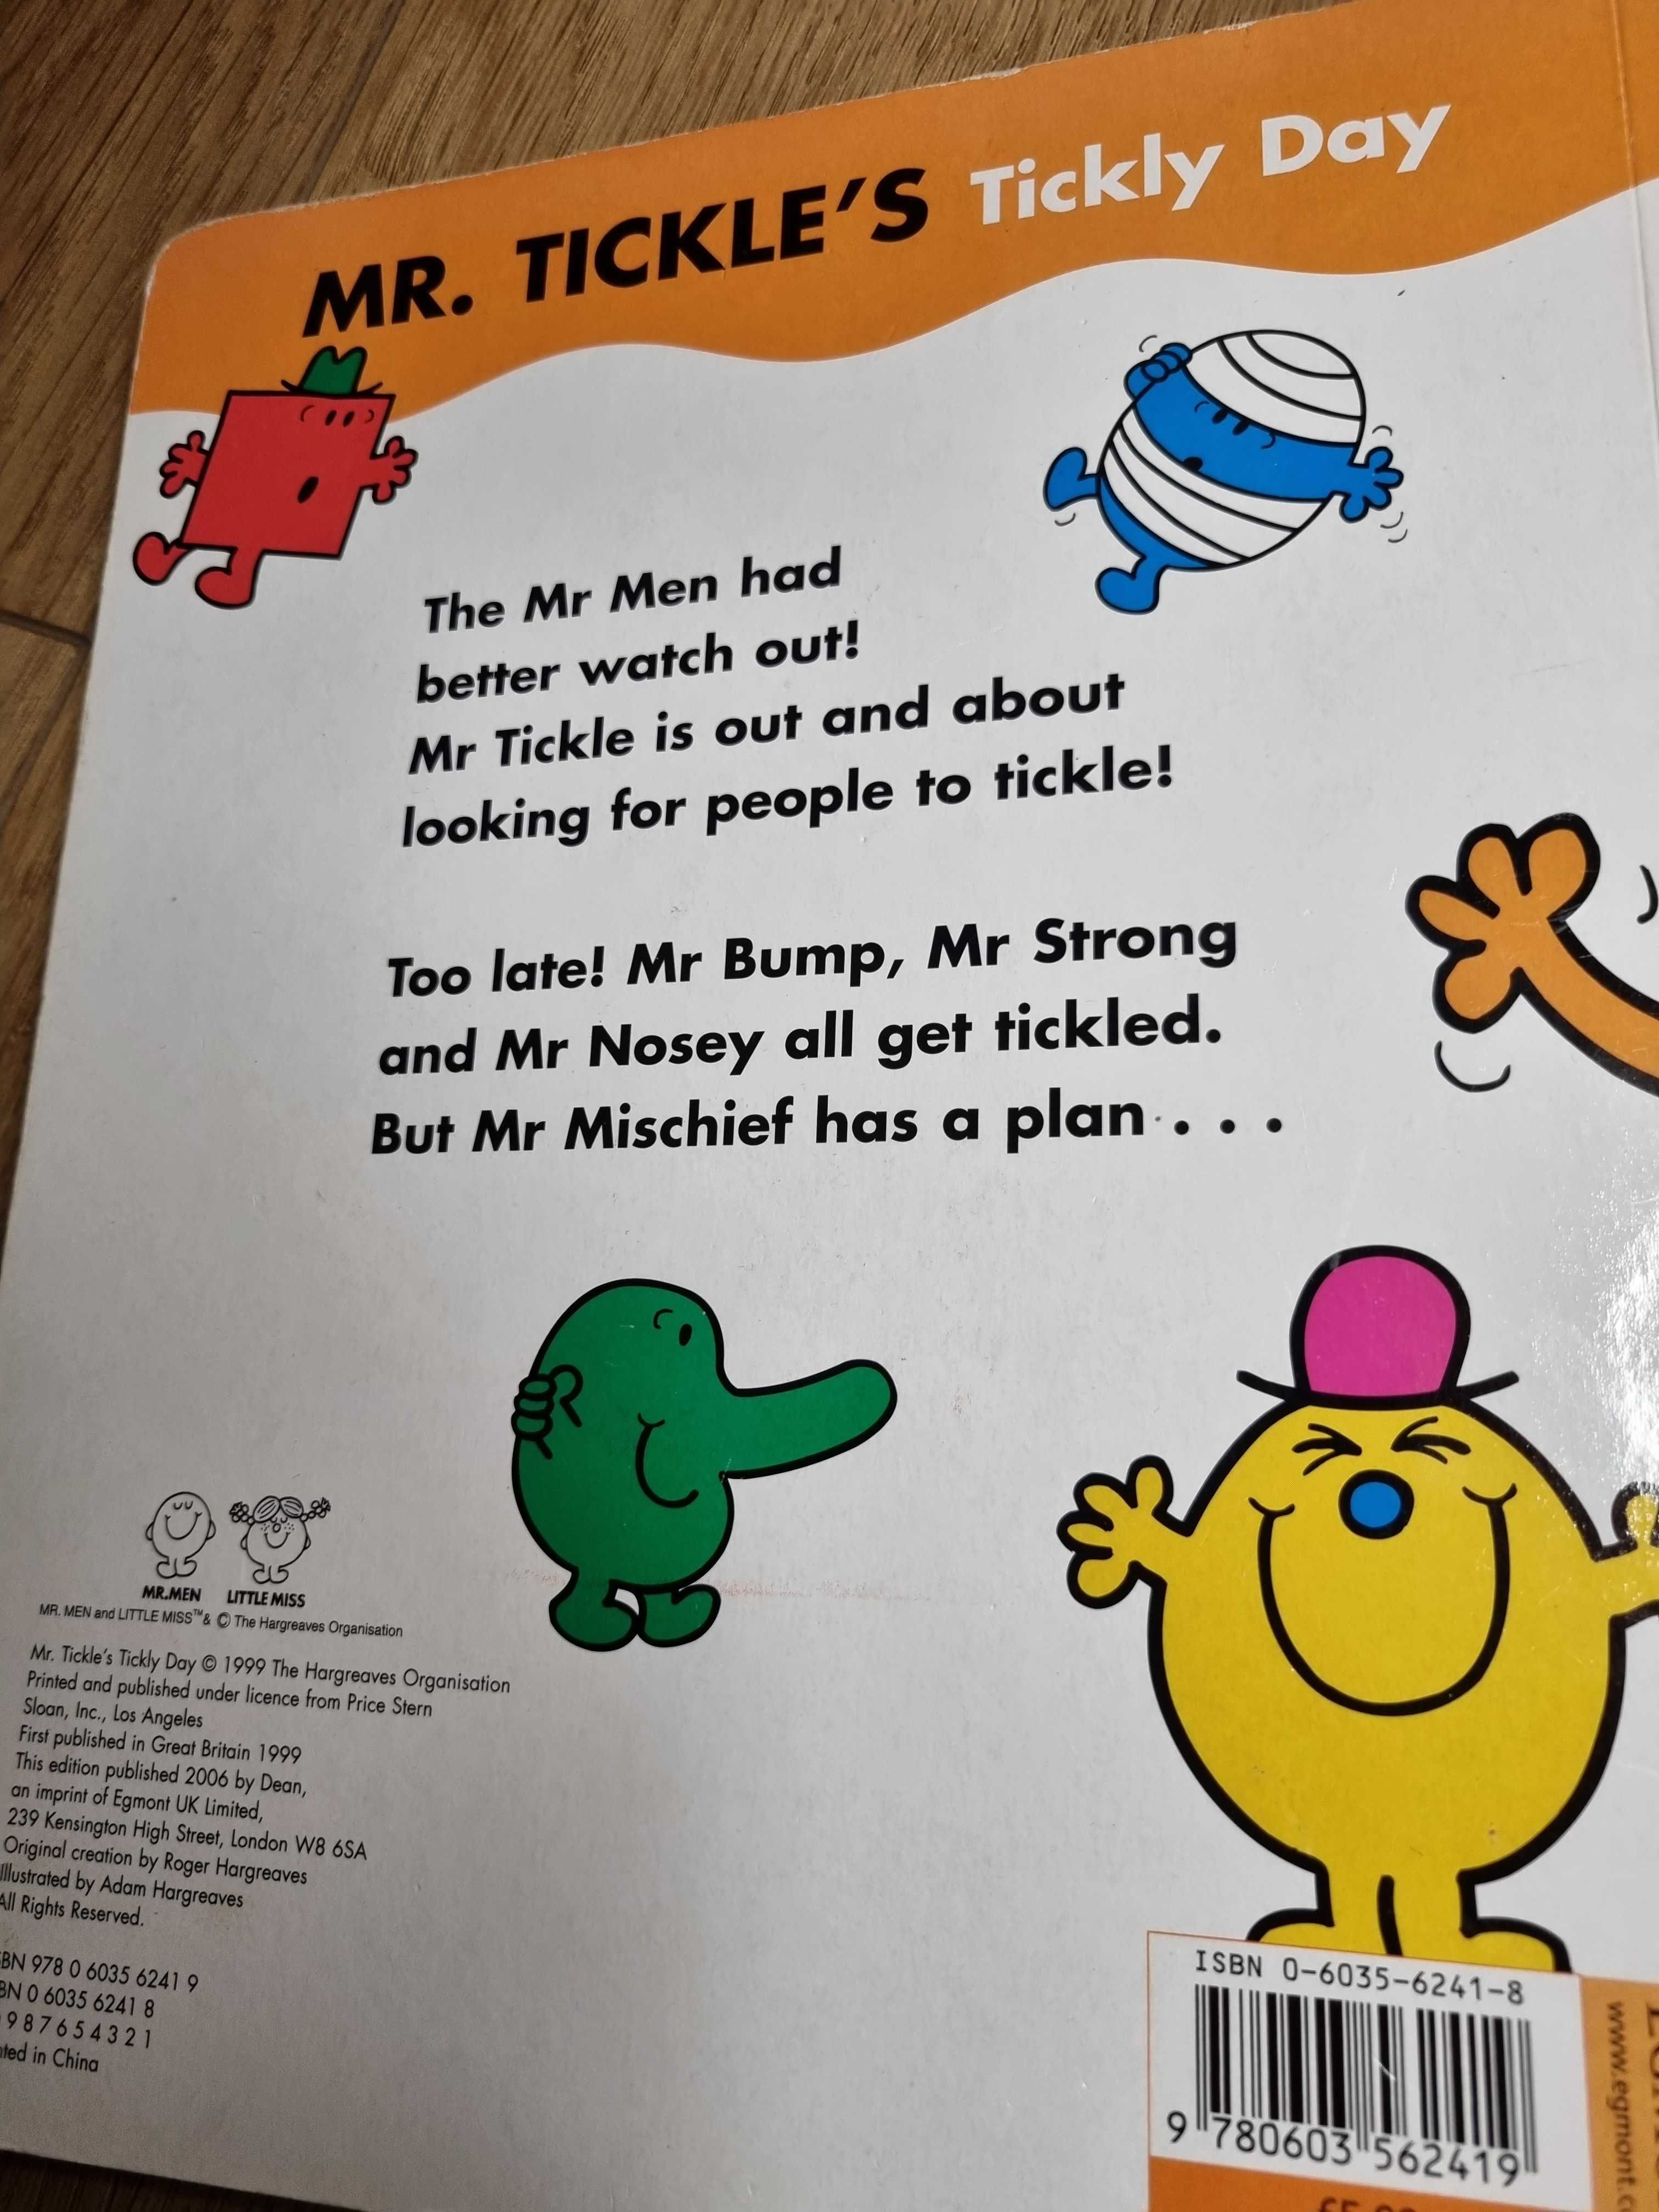 MR. TICKLE'S Tickly Day Roger Hargreaves